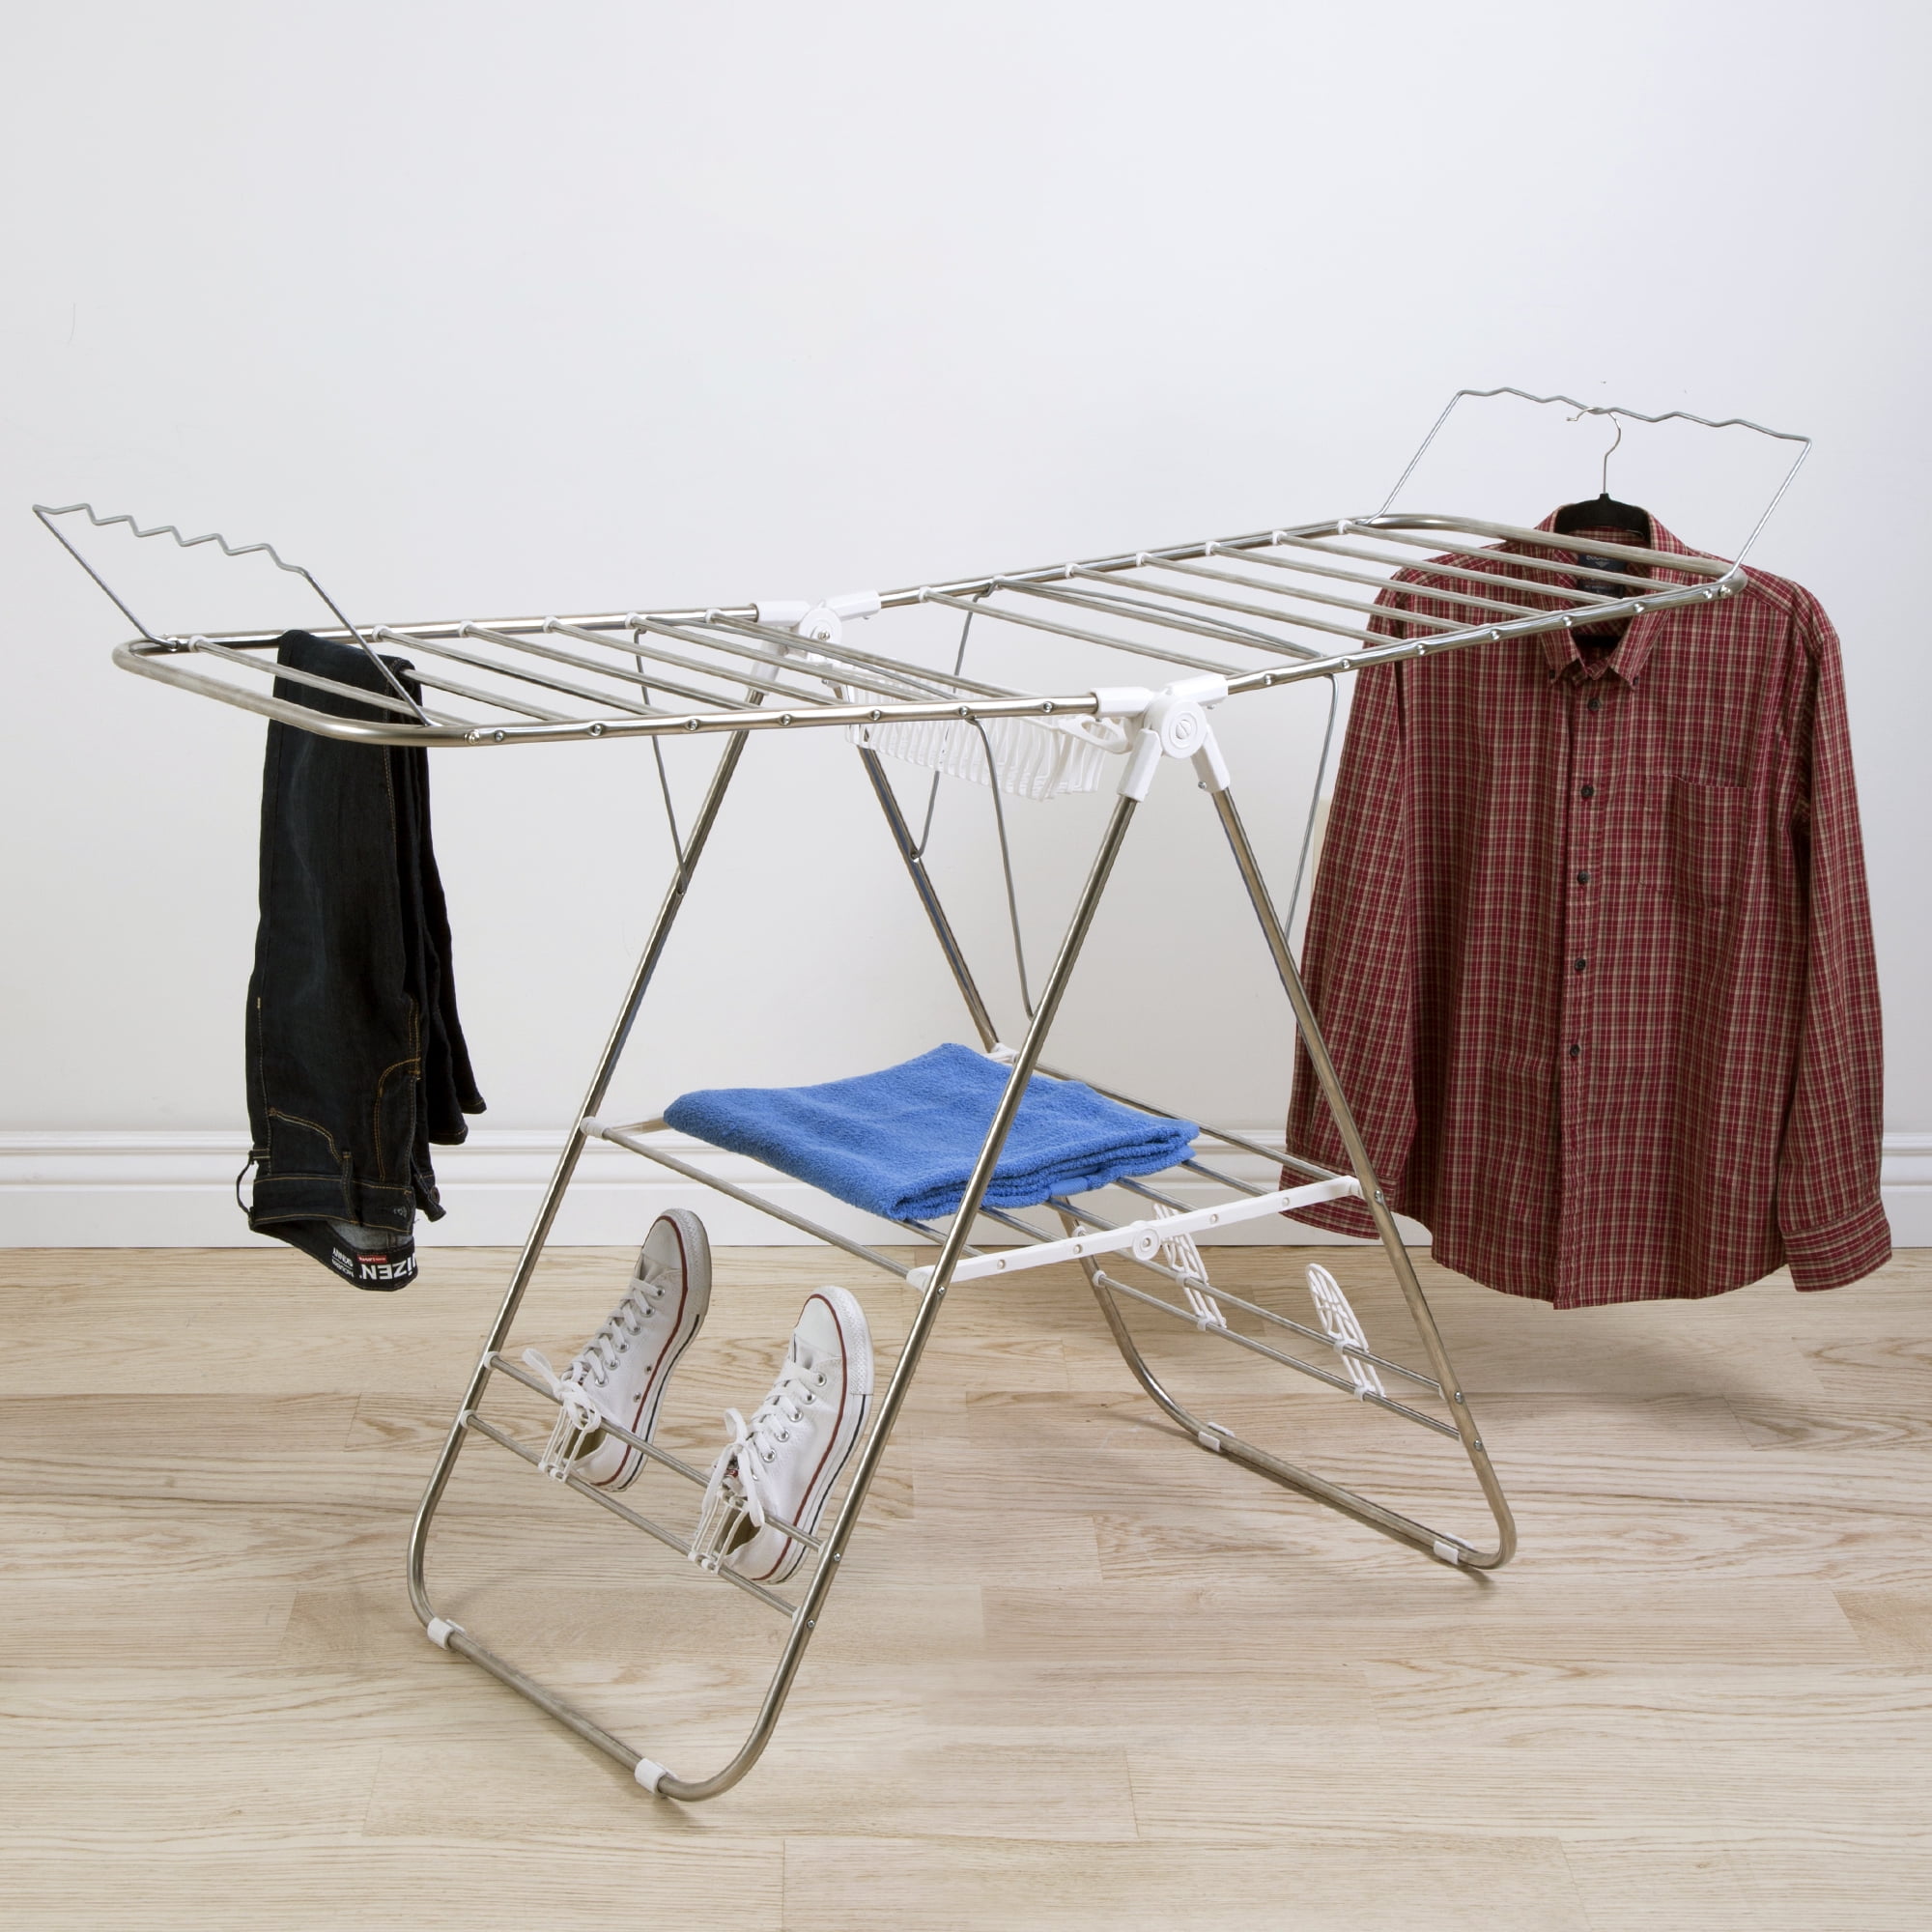 INDOOR Outdoor CLOTHES DRYING RACK Collapsible Adjustable Stainless Steel NEW 